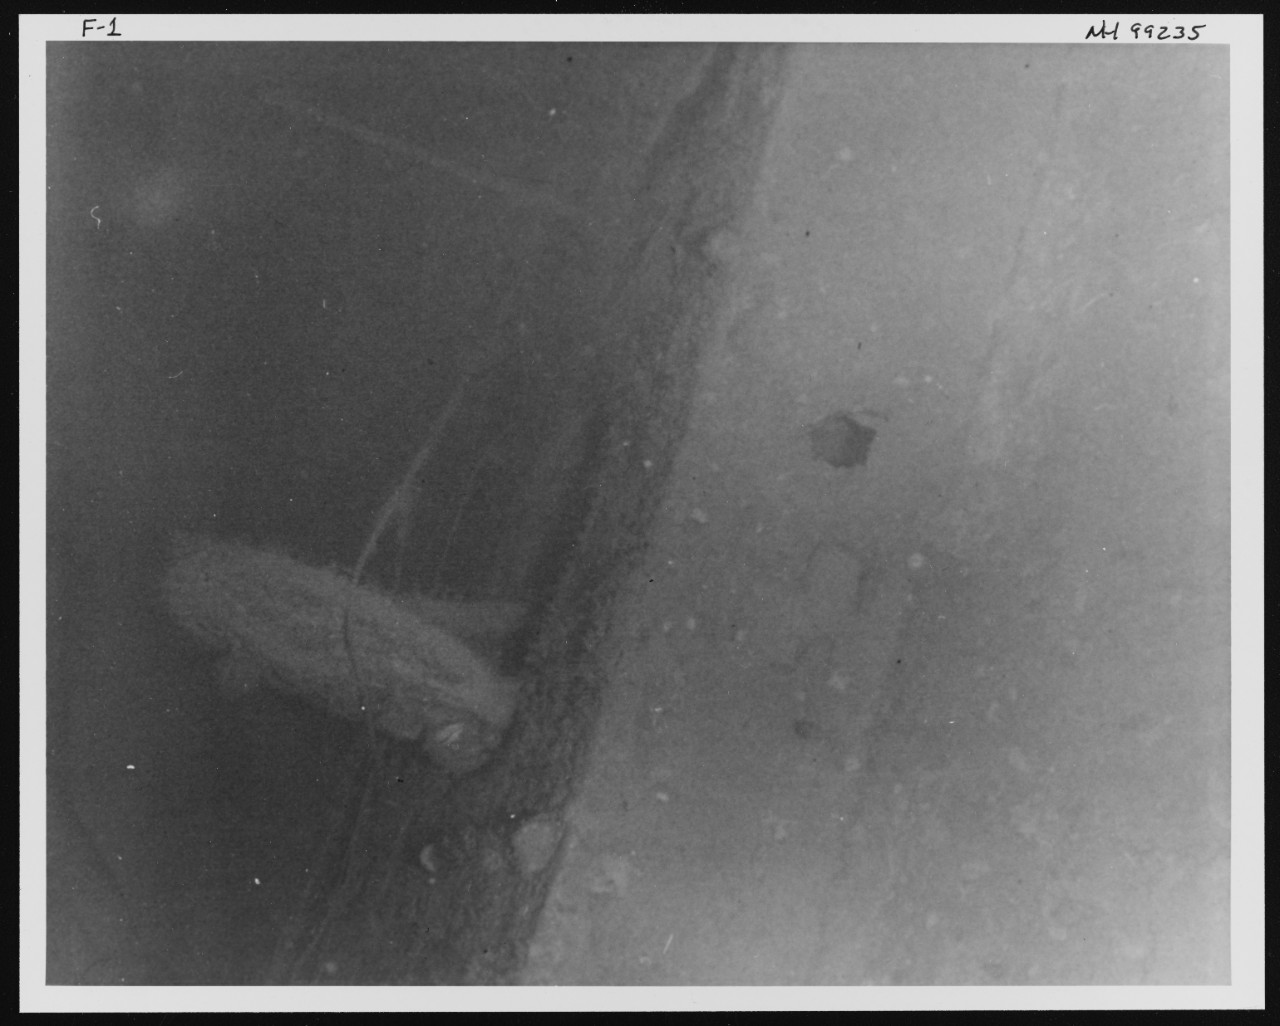 Photo #: NH 99235  Wreck of USS F-1